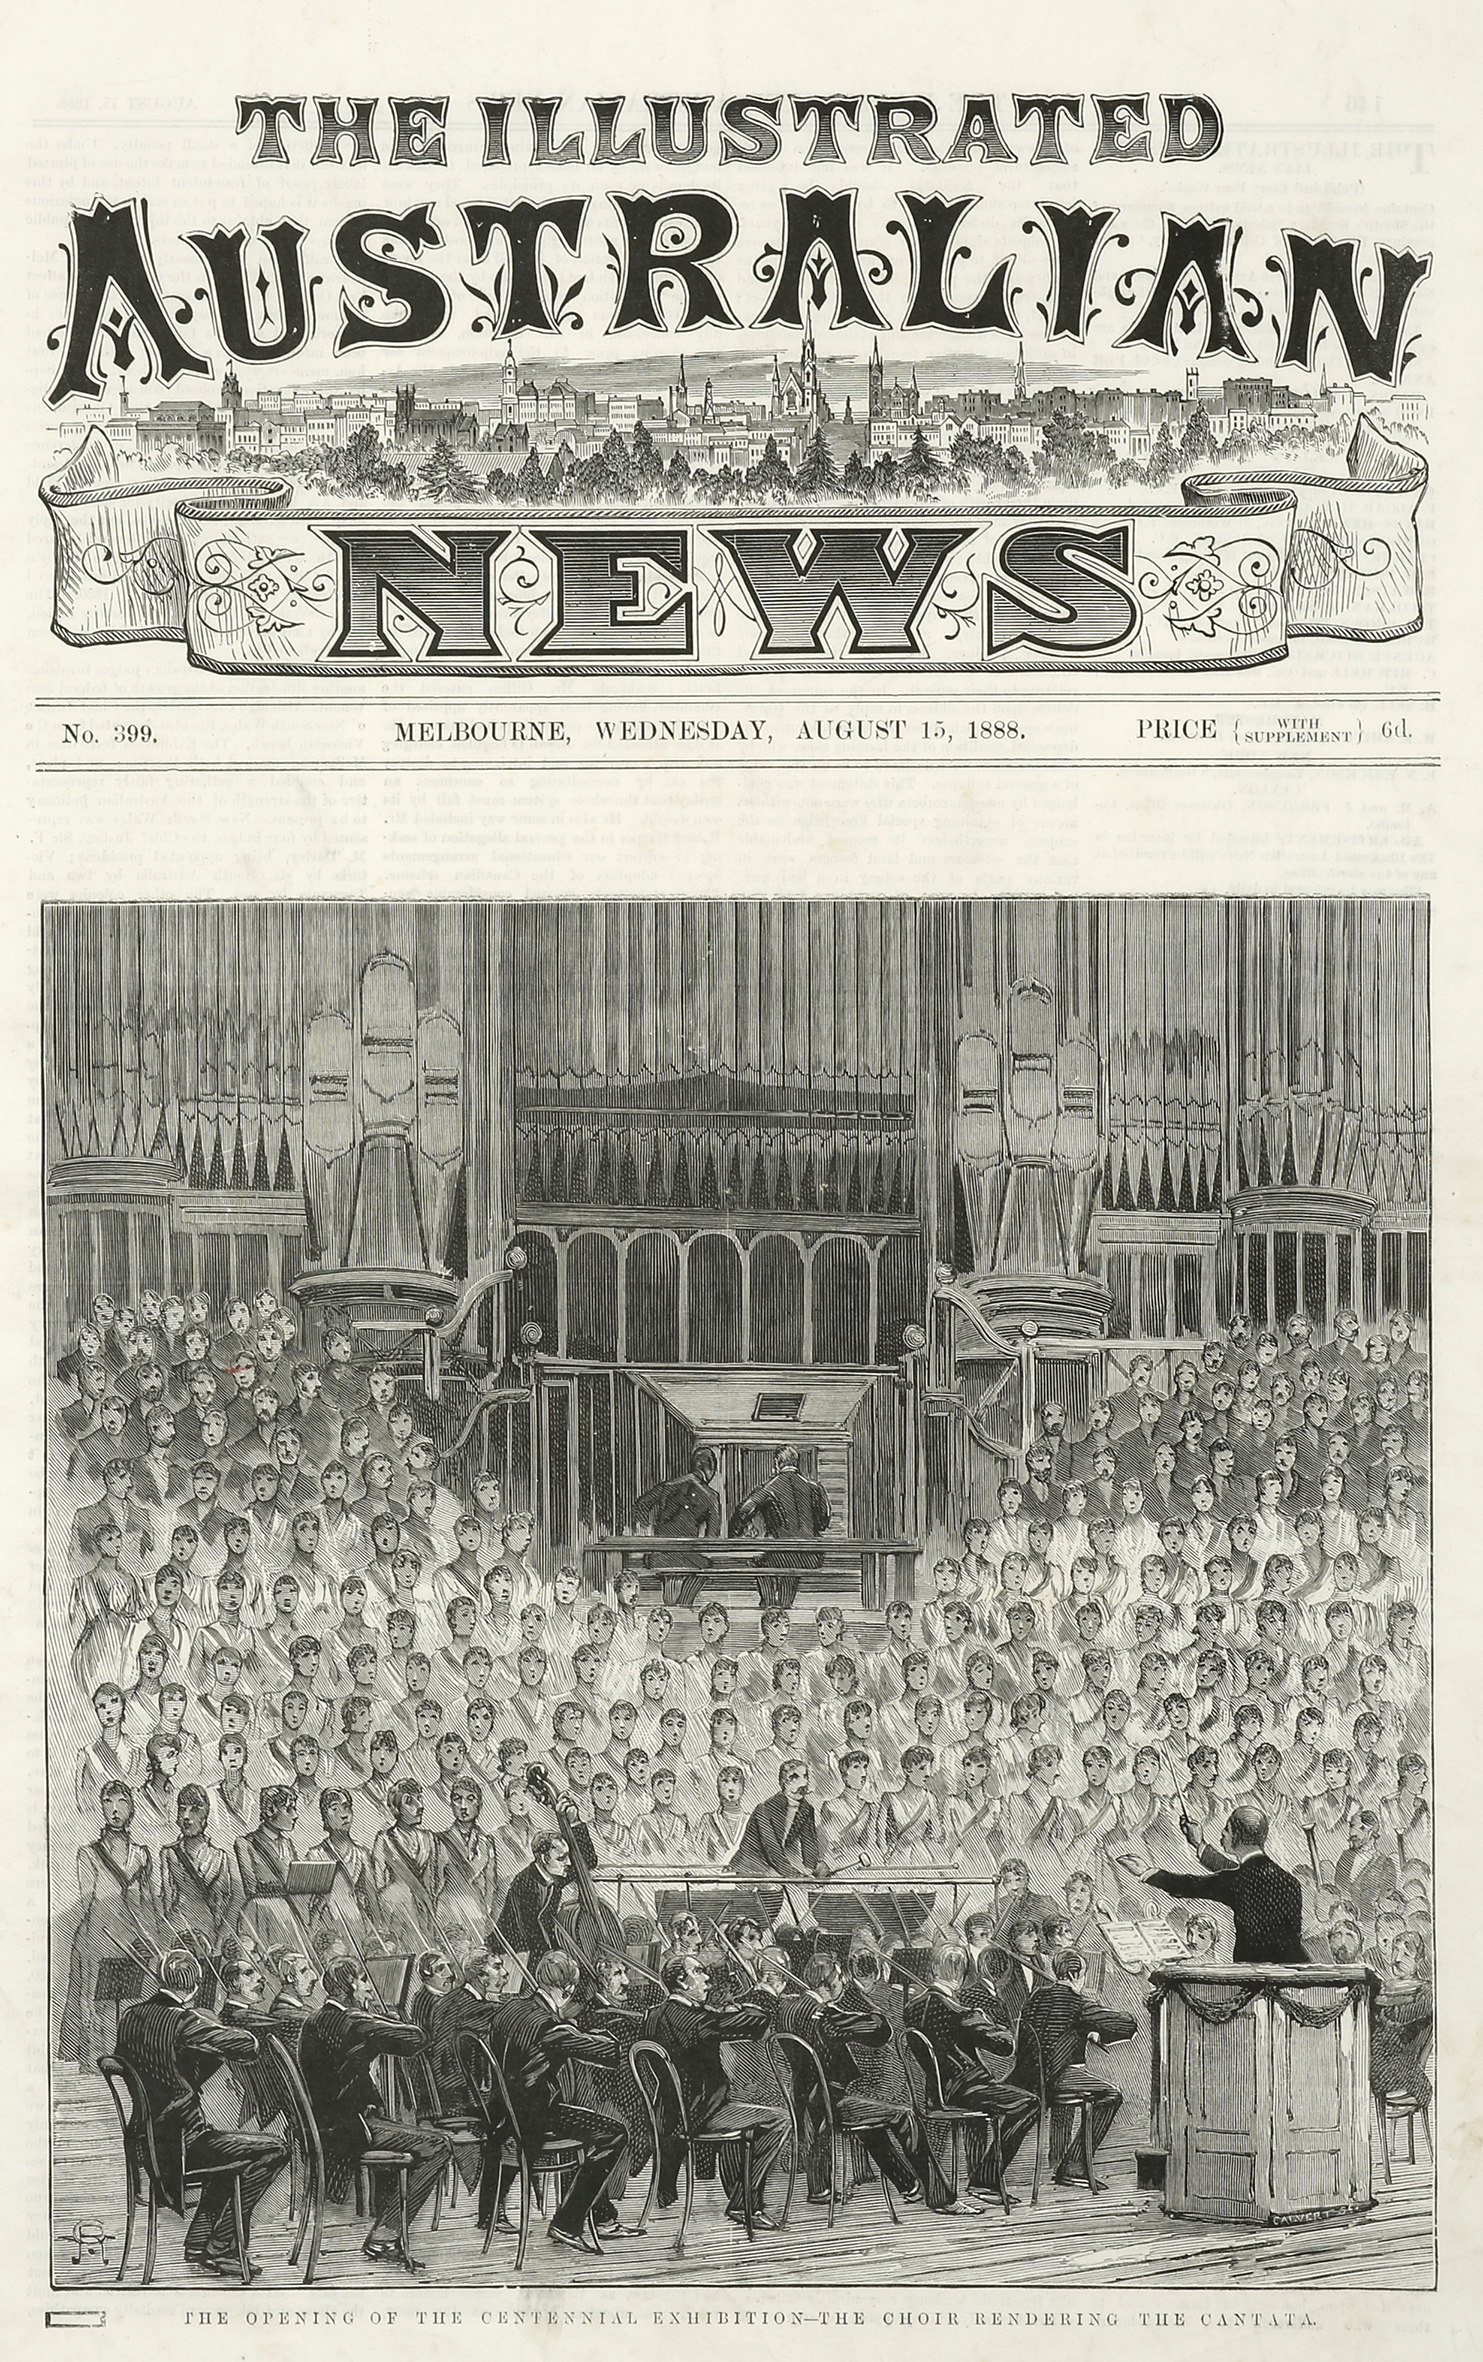 The Opening of the Centennial Exhibition-The Choir Rendering the Cantata. - Antique View from 1880